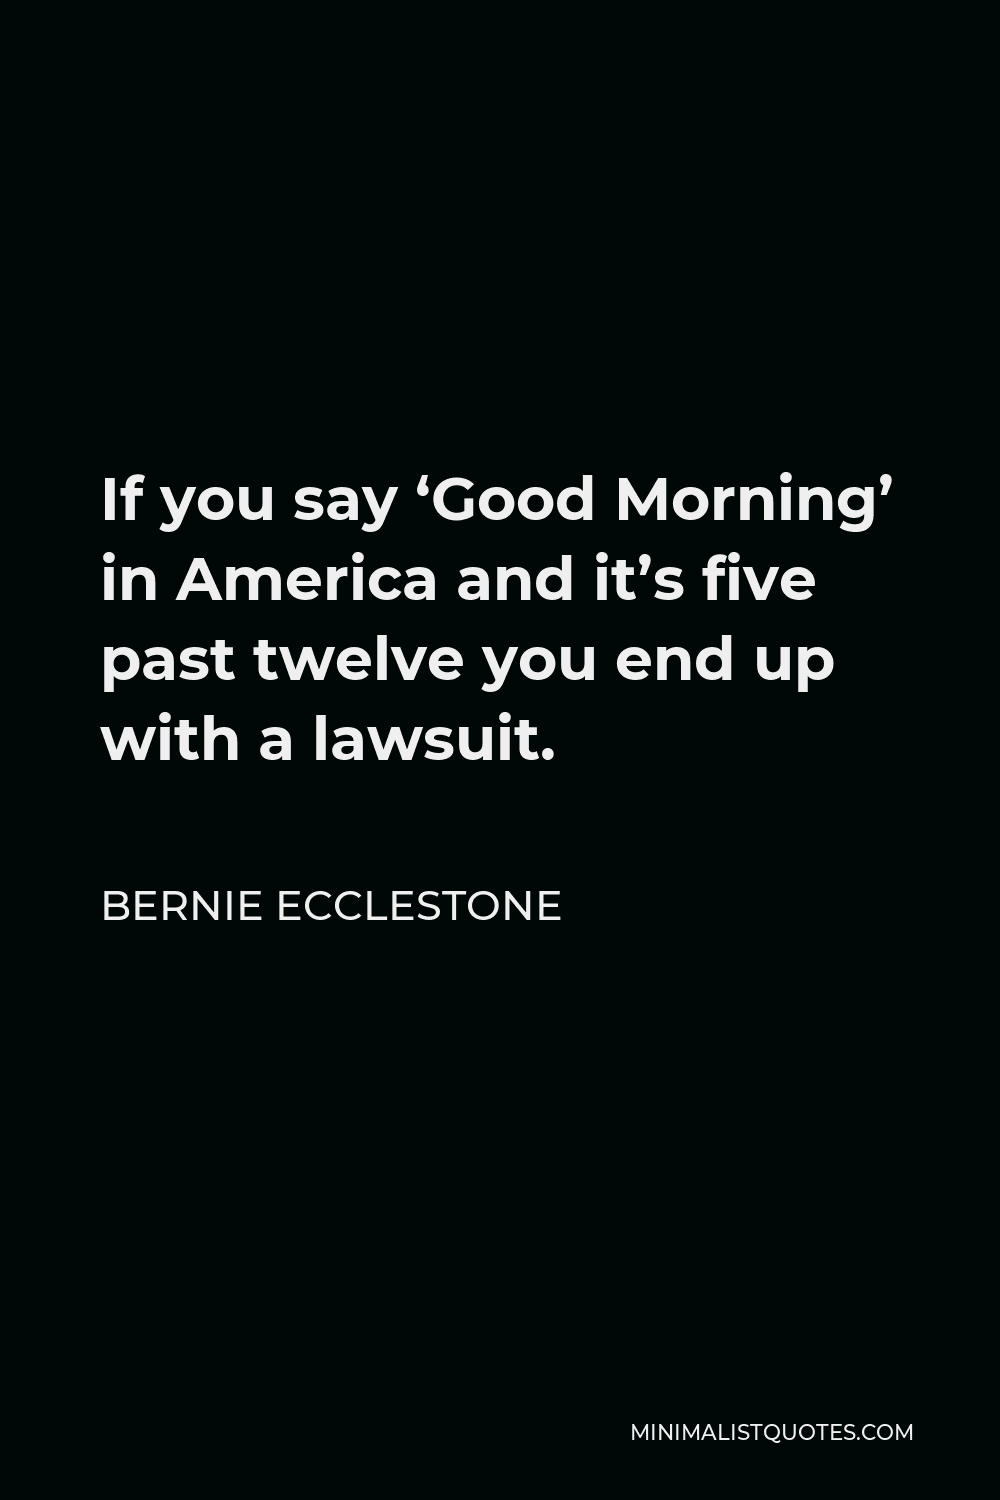 Bernie Ecclestone Quote - If you say ‘Good Morning’ in America and it’s five past twelve you end up with a lawsuit.